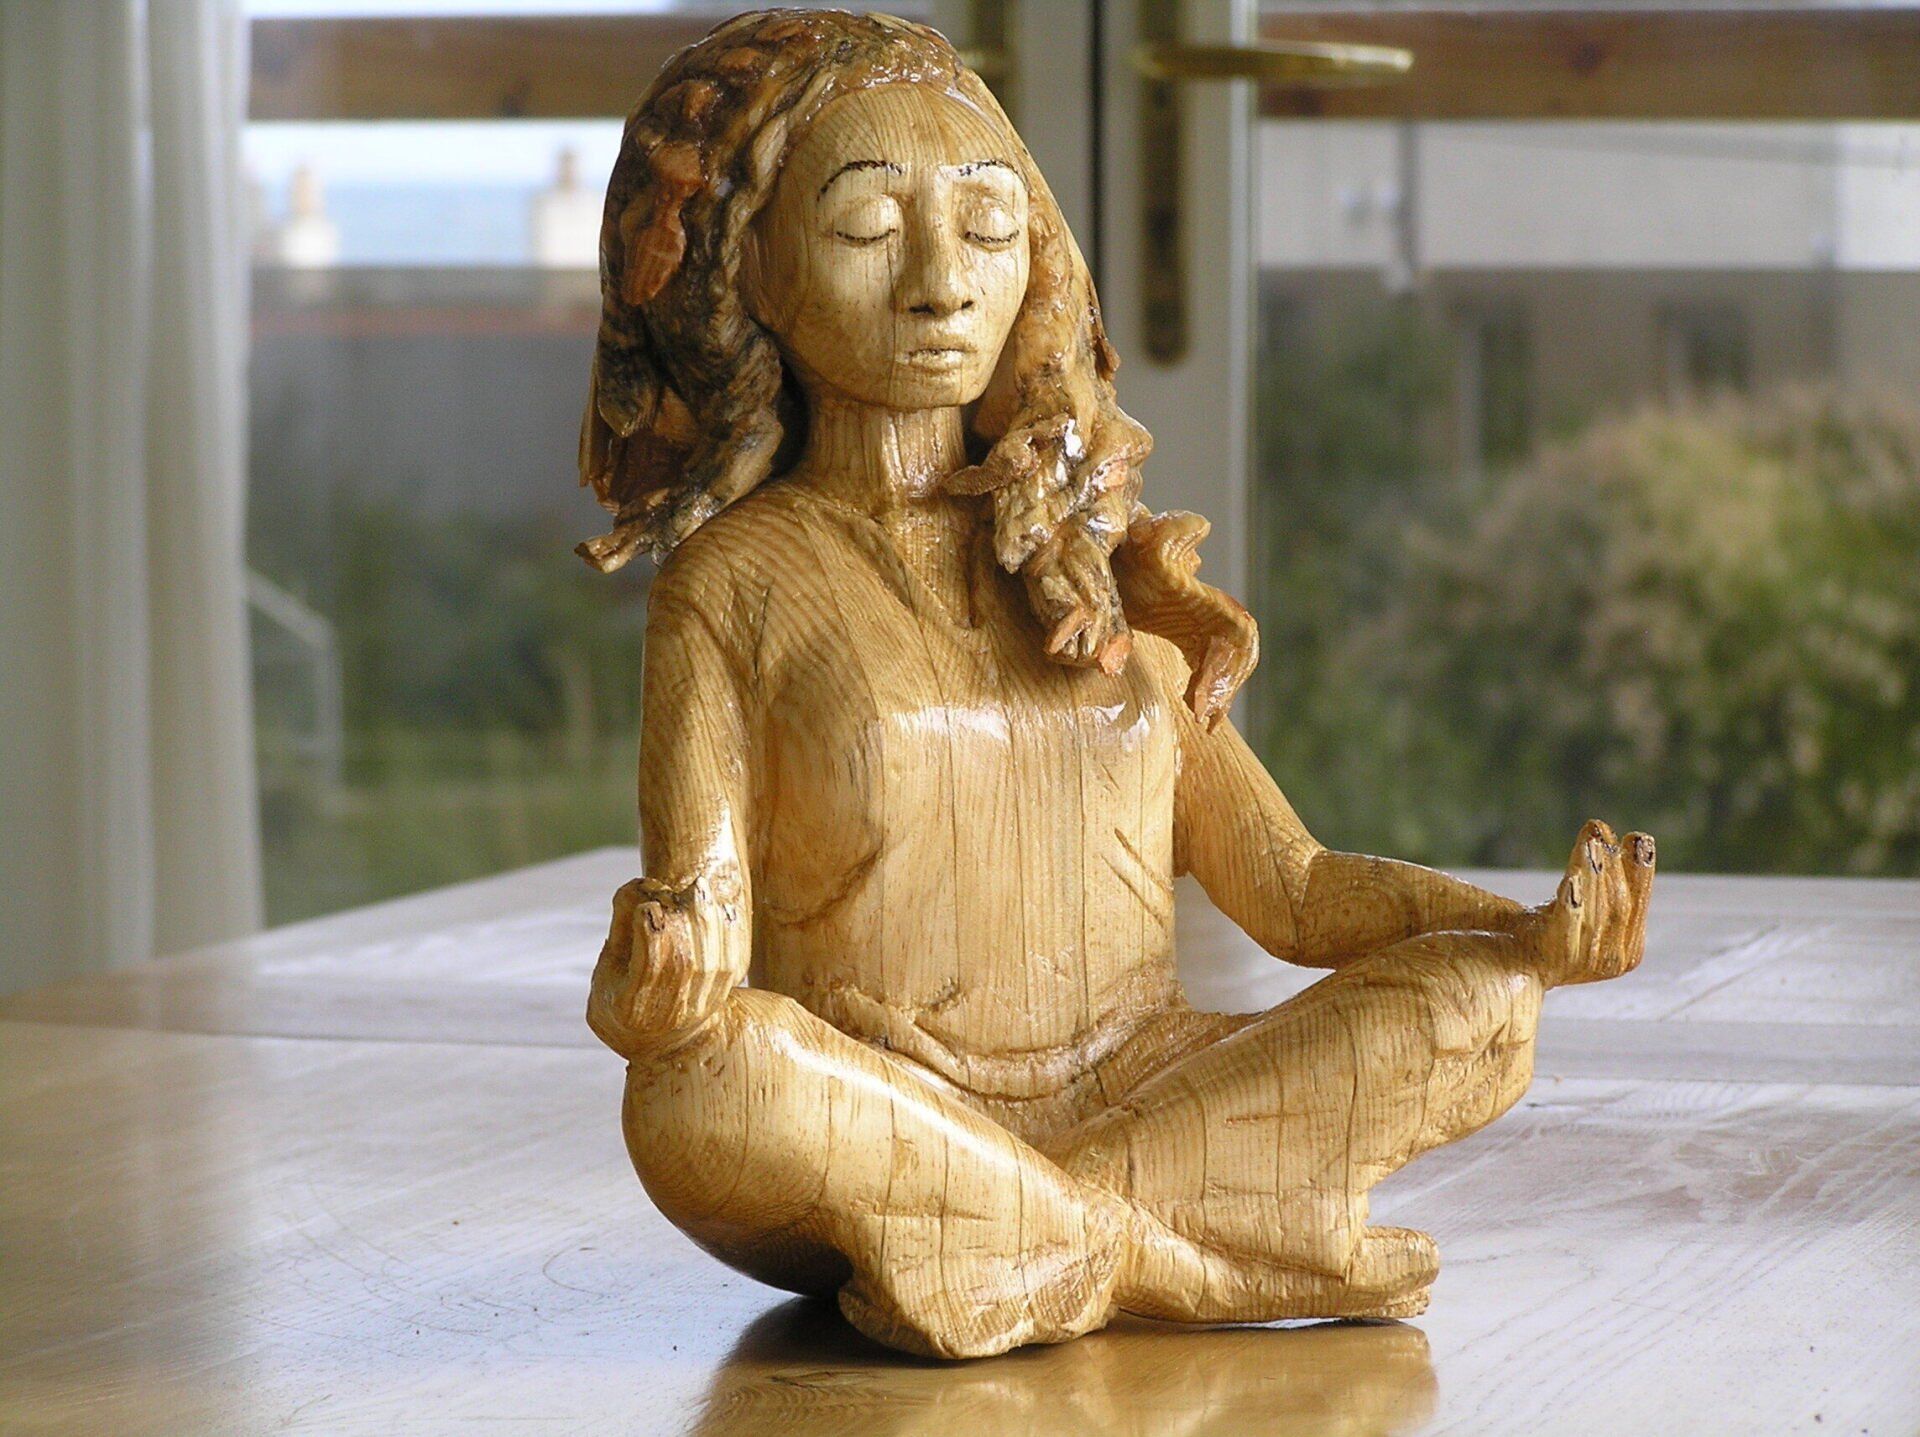 Sculpture for inside the home